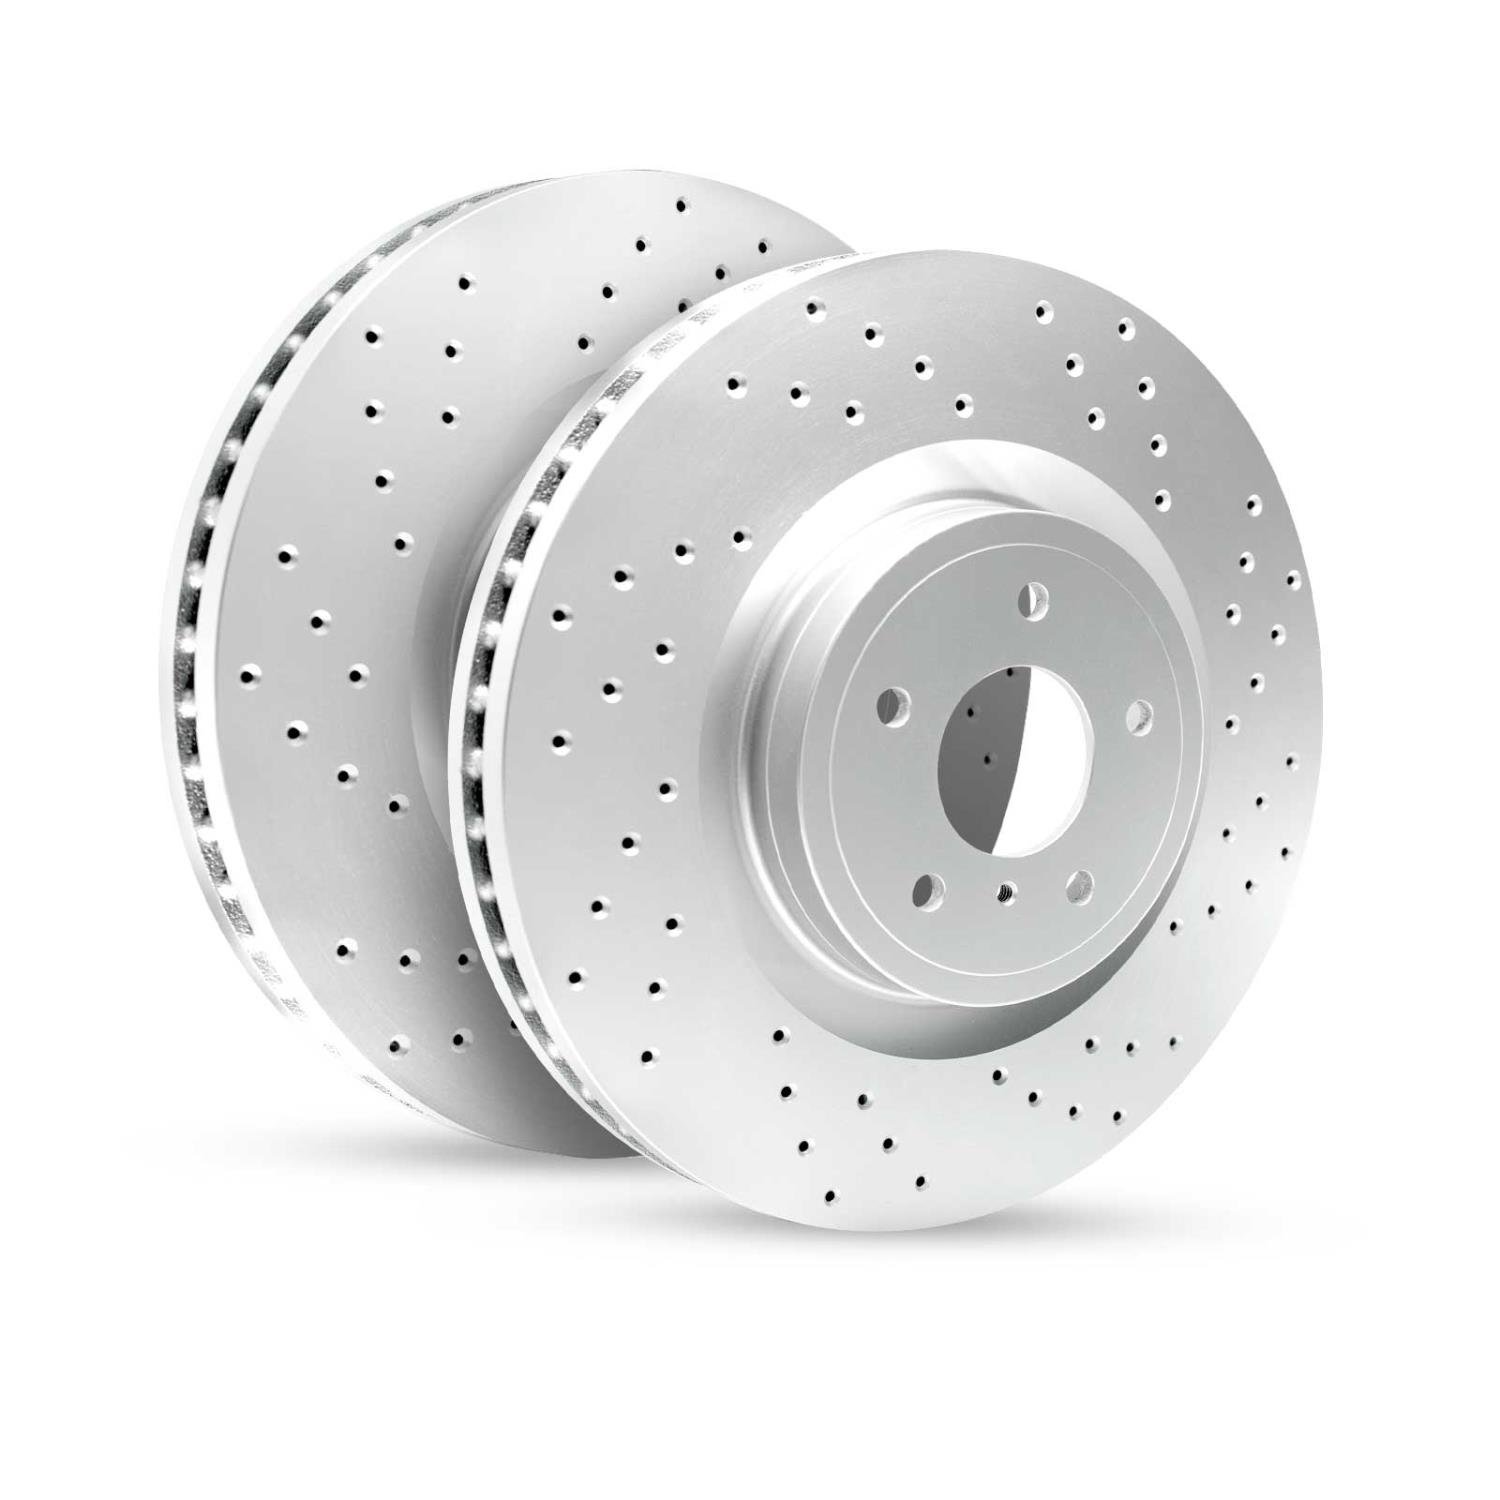 GEO-Carbon Drilled/Slotted Rotors, 2005-2012 Infiniti/Nissan, Position: Rear